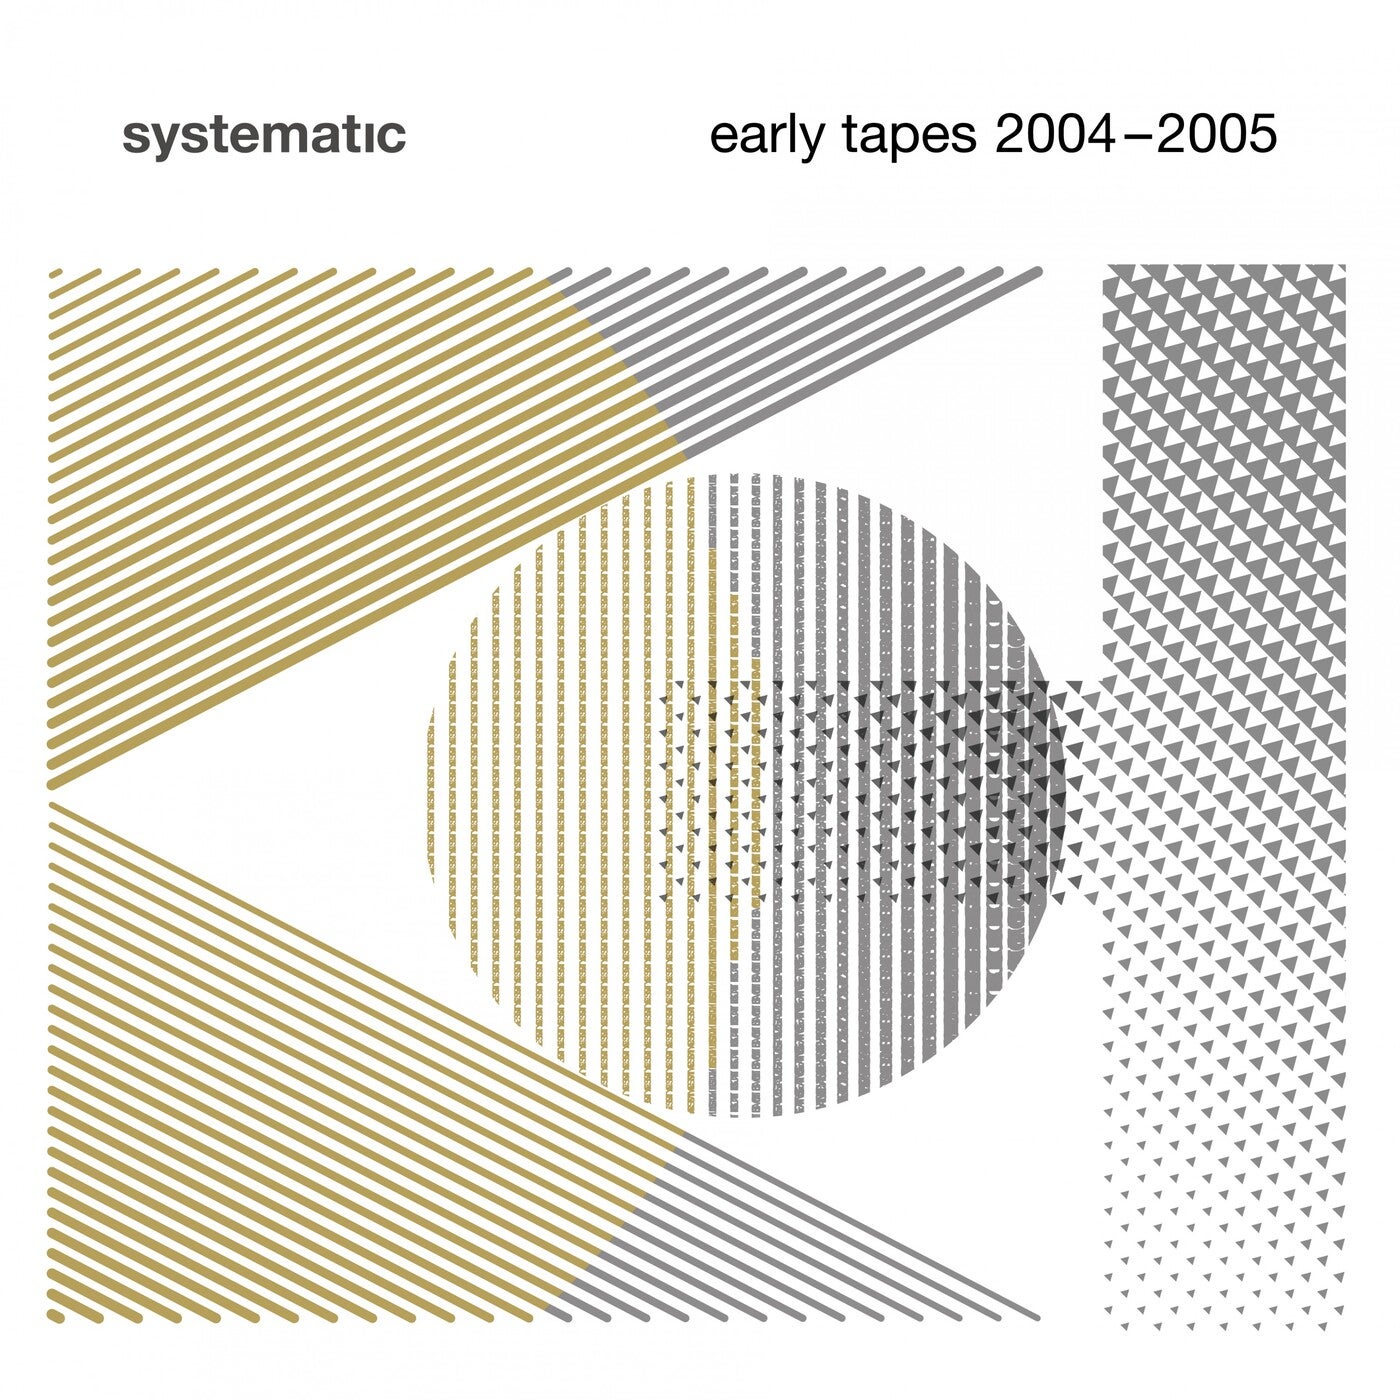 Systematic - Early Tapes 2004-2005